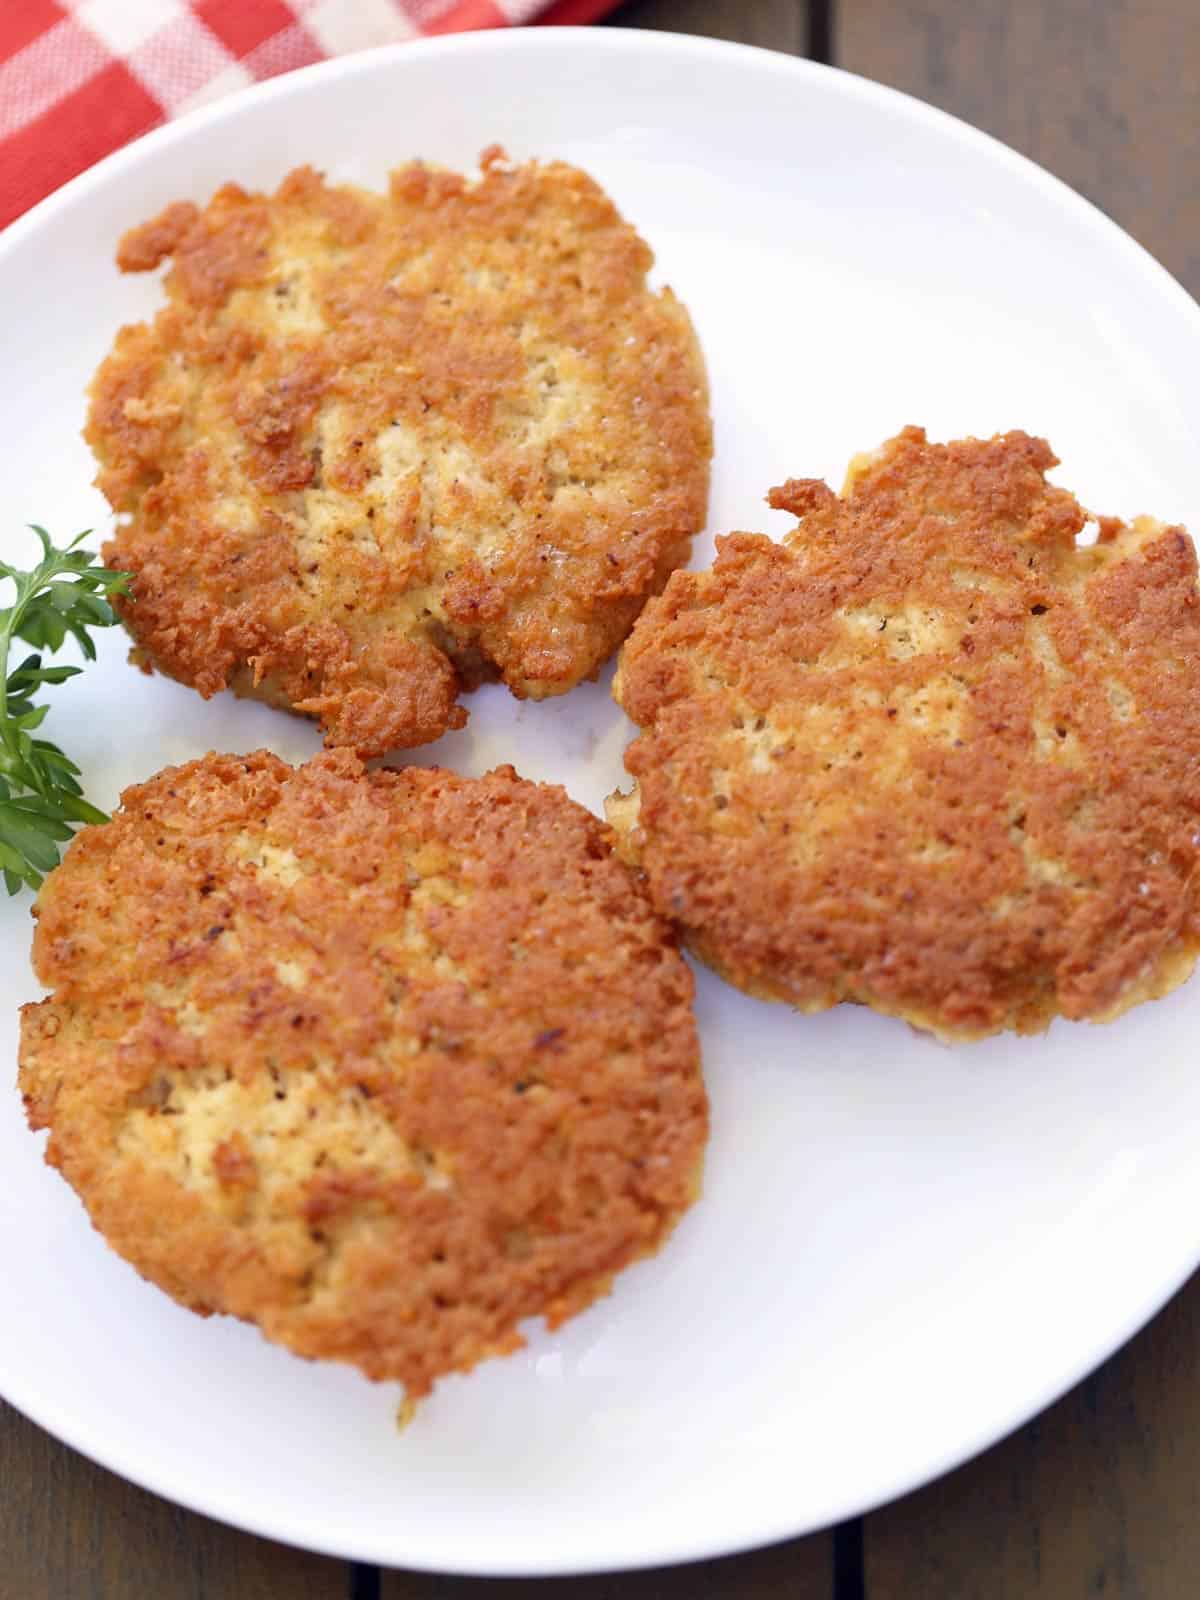 Three chicken patties served on a white plate with a red napkin. 